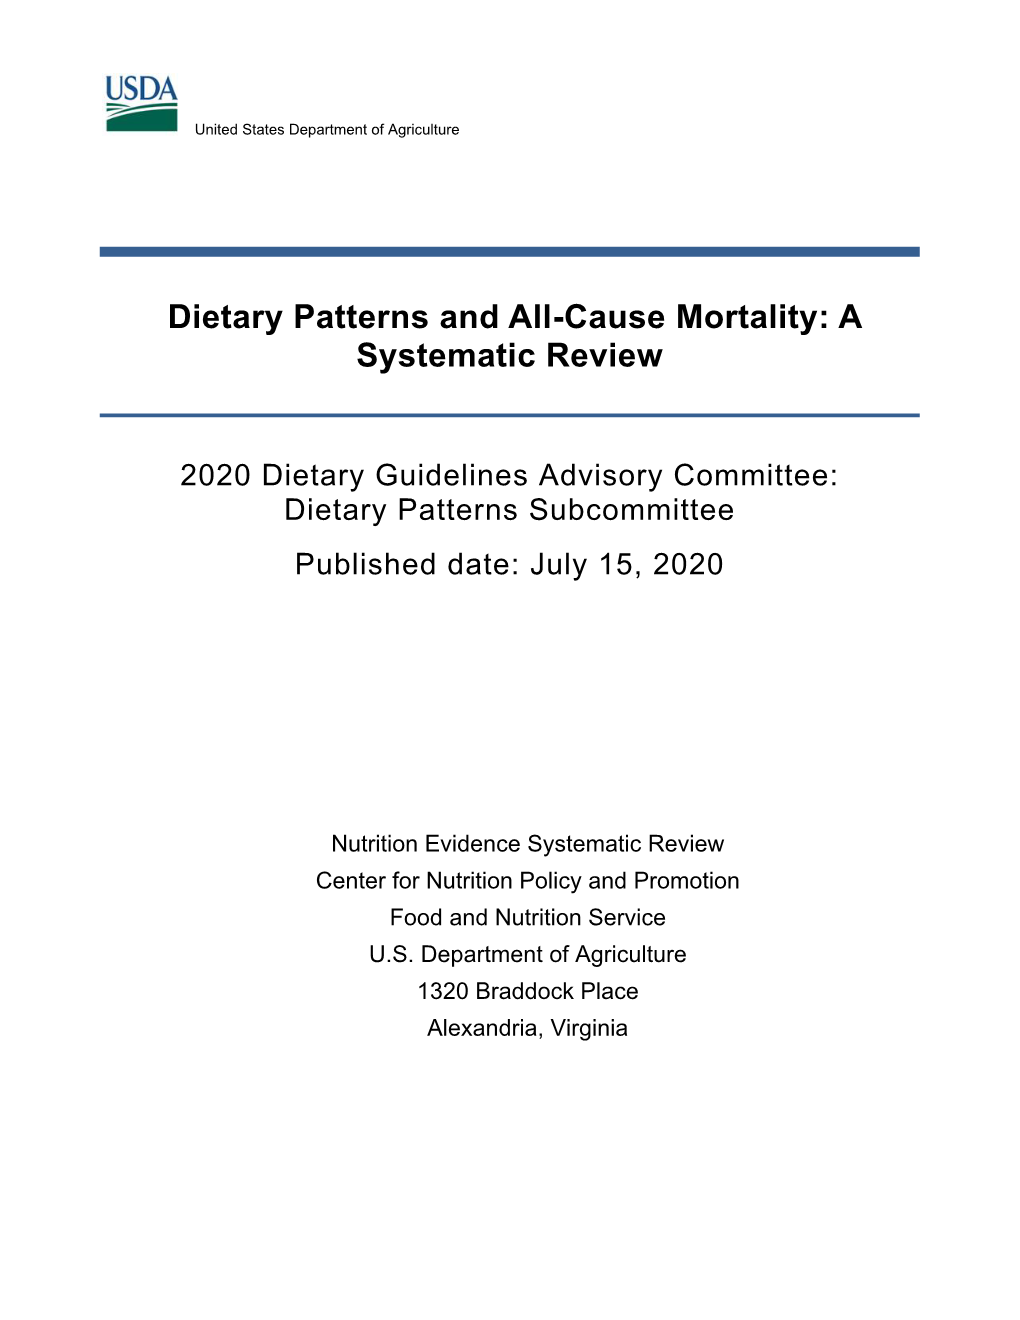 Dietary Patterns and All-Cause Mortality: a Systematic Review